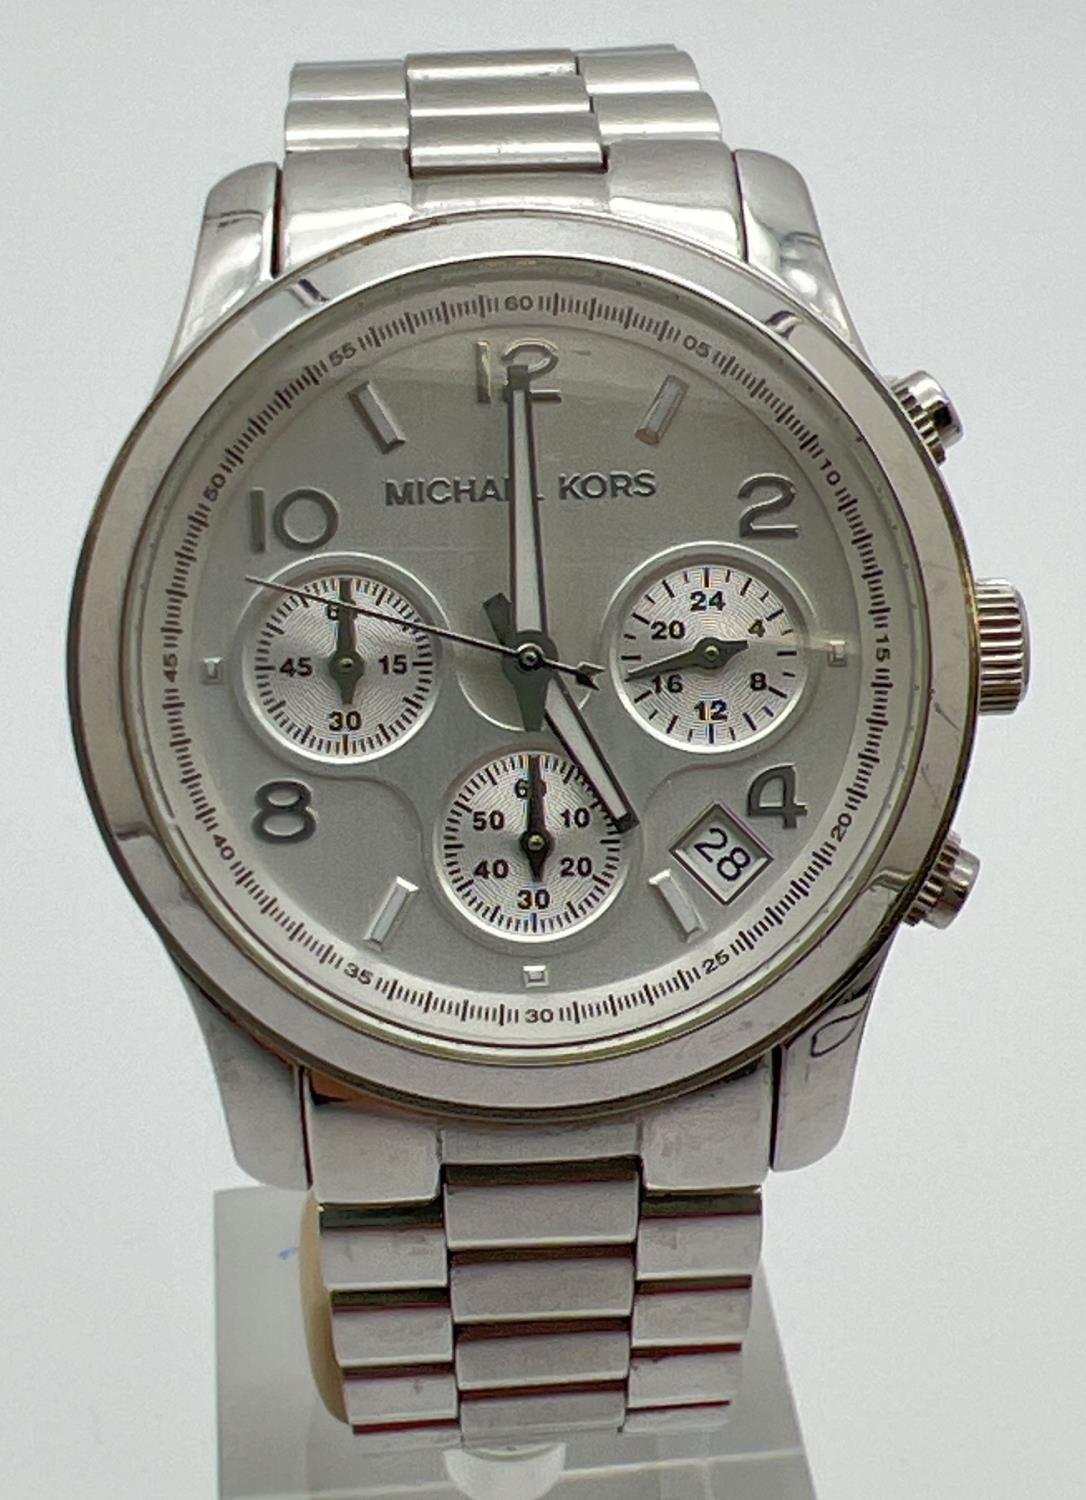 A Michael Kors men's chronograph MK5076 wristwatch. Stainless steel strap and case. White face